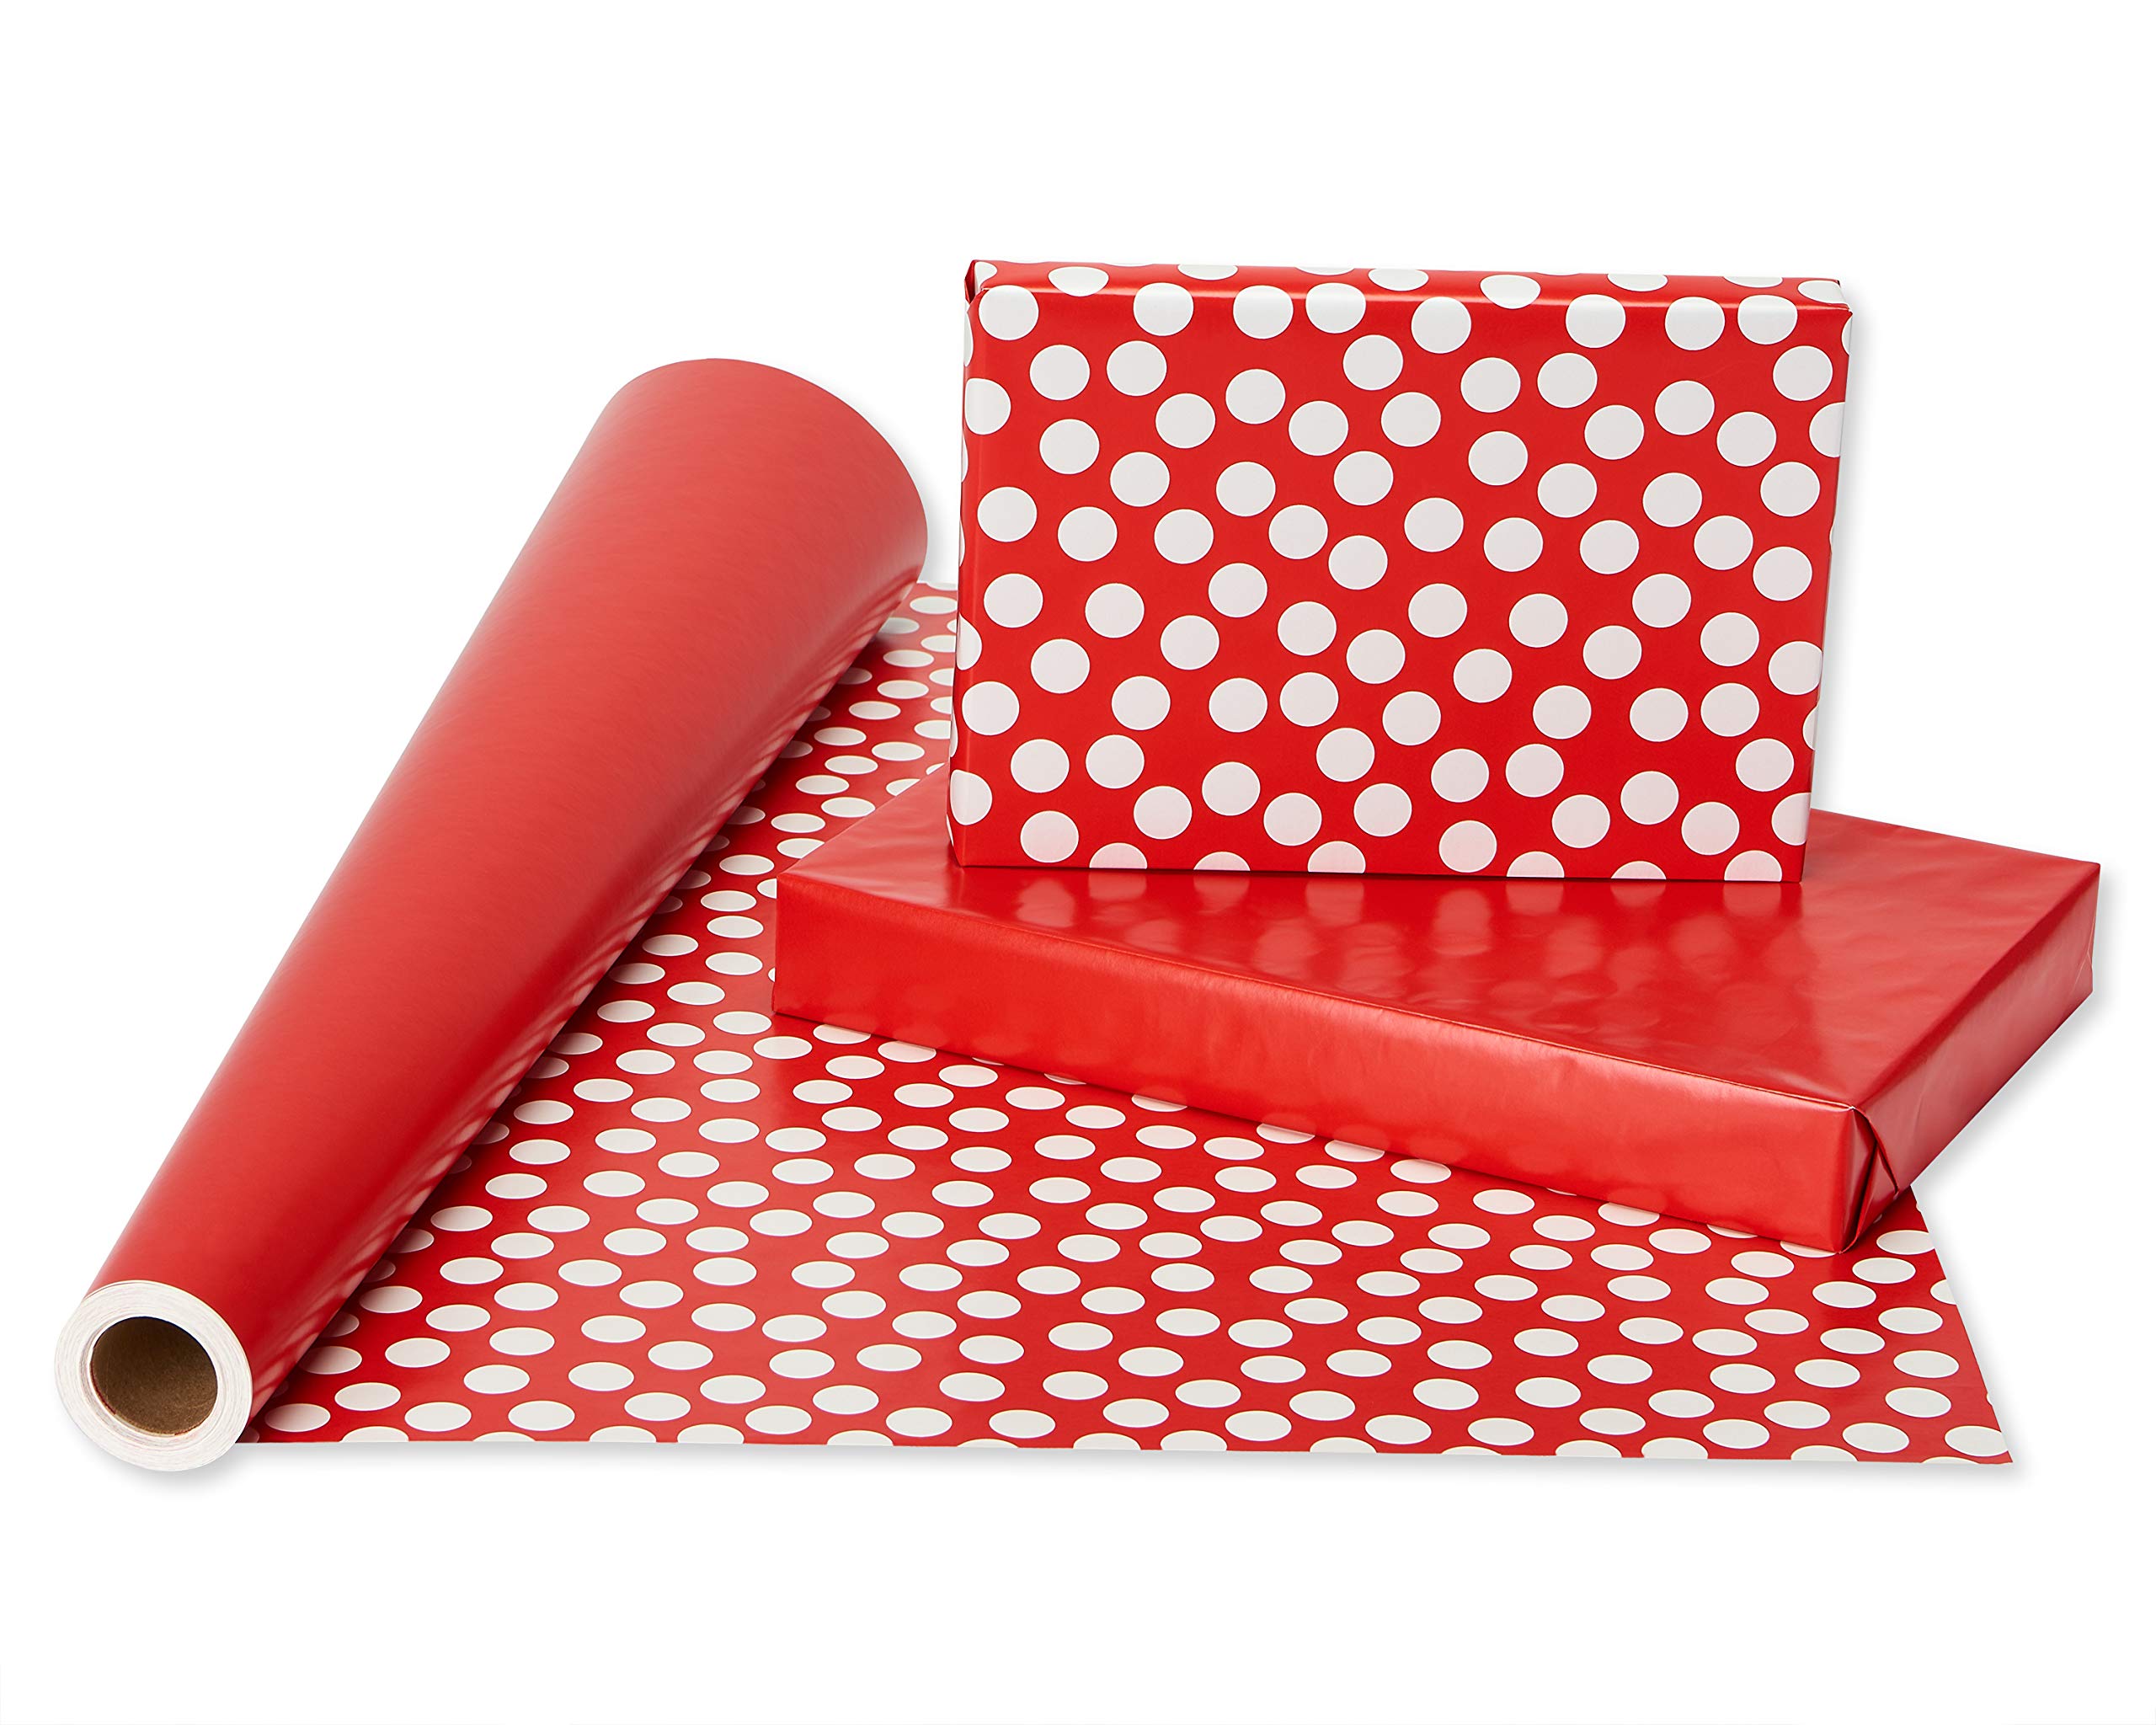 American Greetings Reversible Wrapping Paper Jumbo Roll for Birthdays, Graduation and All Occasions, Red and White Polka Dots (1 Roll, 175 sq. ft.)